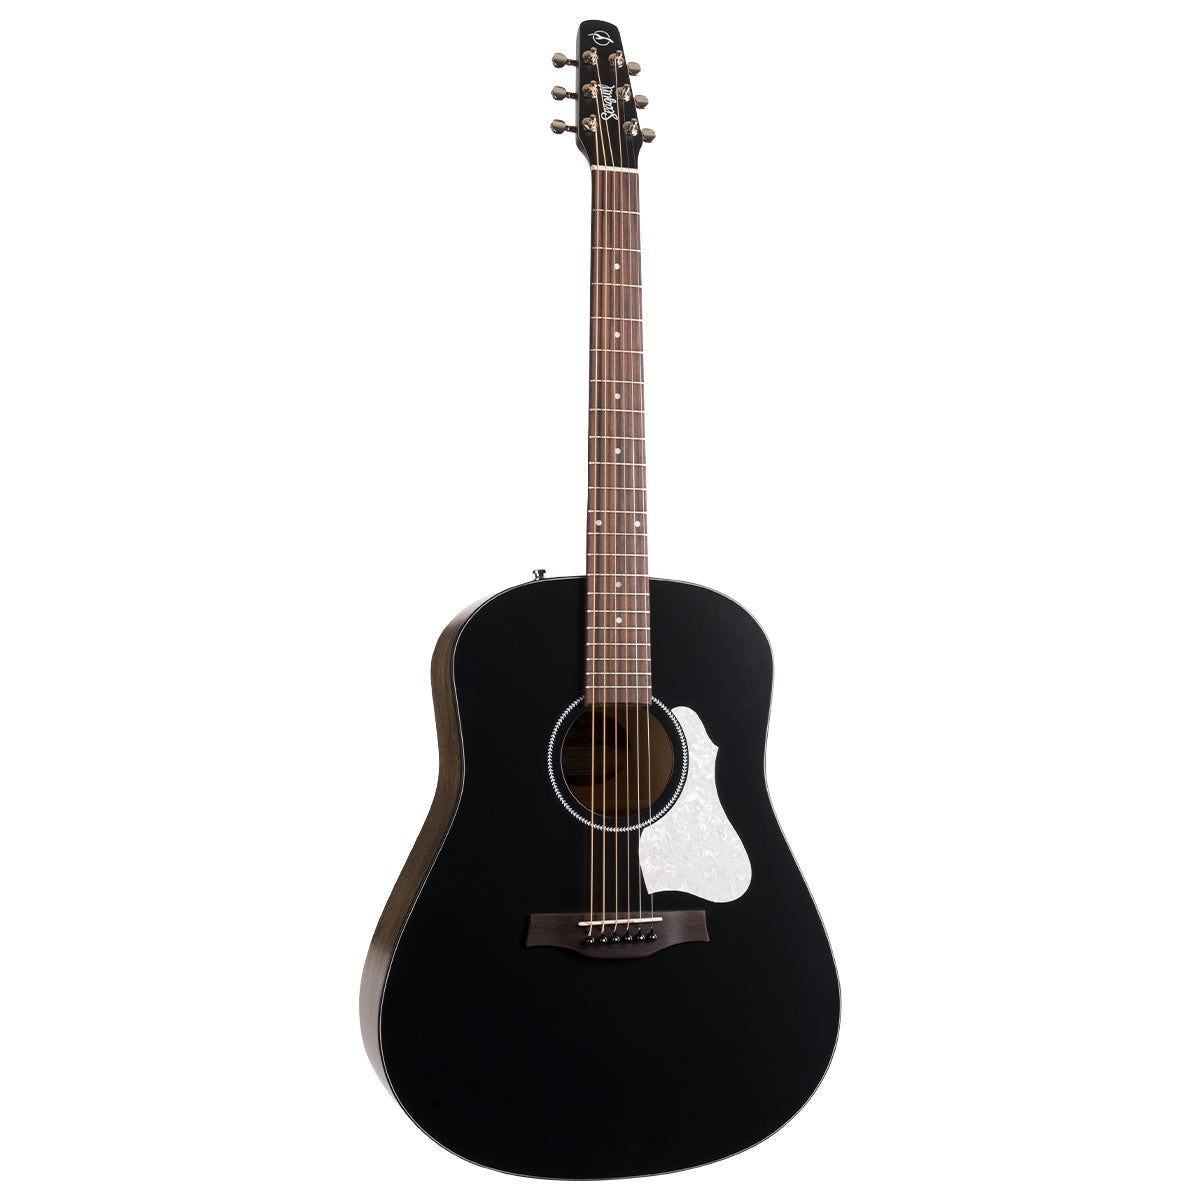 Seagull S6 Classic Electro-Acoustic Guitar ~ Black A/E,  for sale at Richards Guitars.